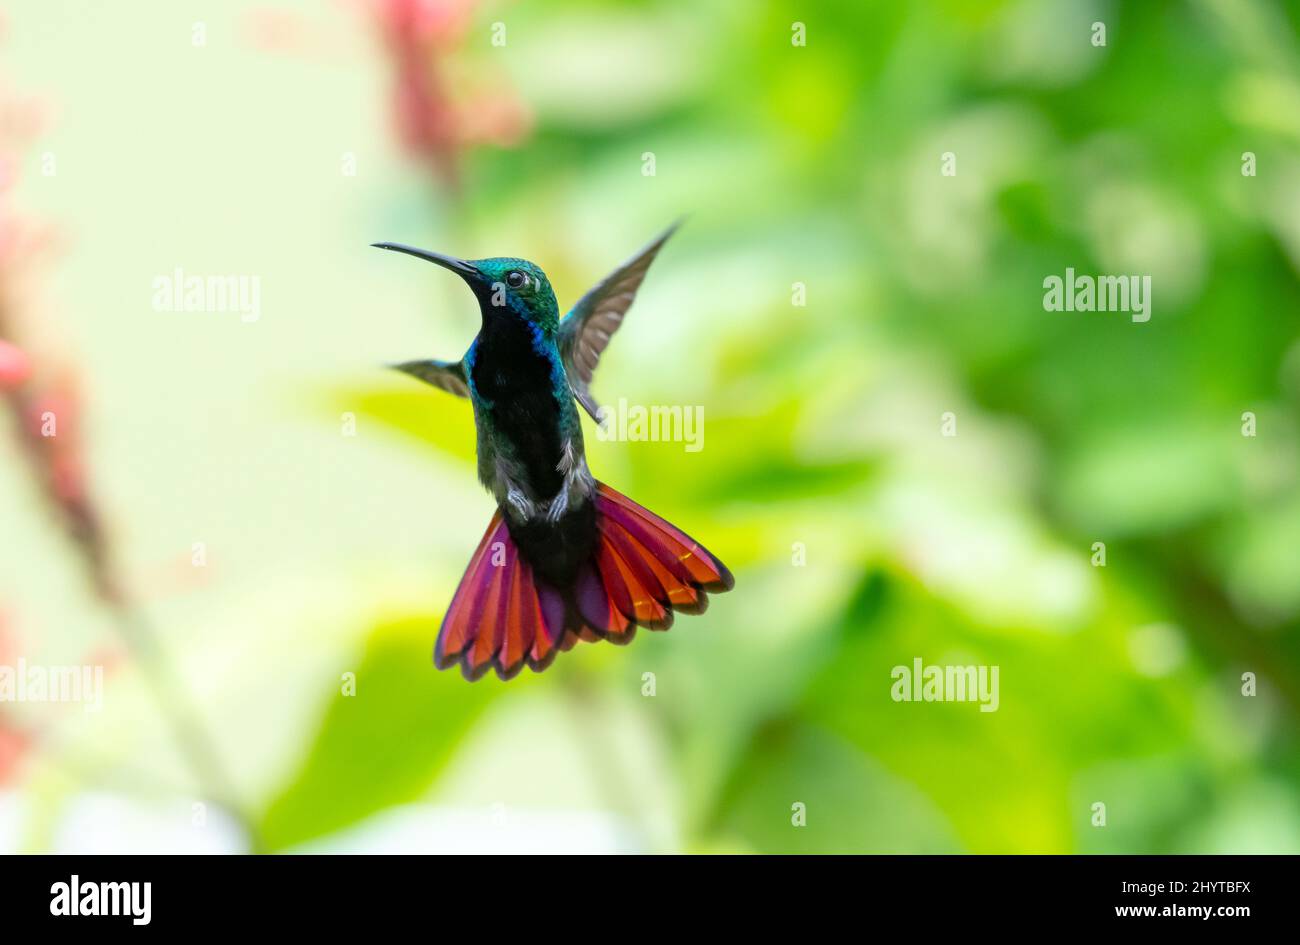 Male Black-throated Mango hummingbird, Anthracothorax nigricollis, hovering in an unusual pose with his pink tail flared. Stock Photo